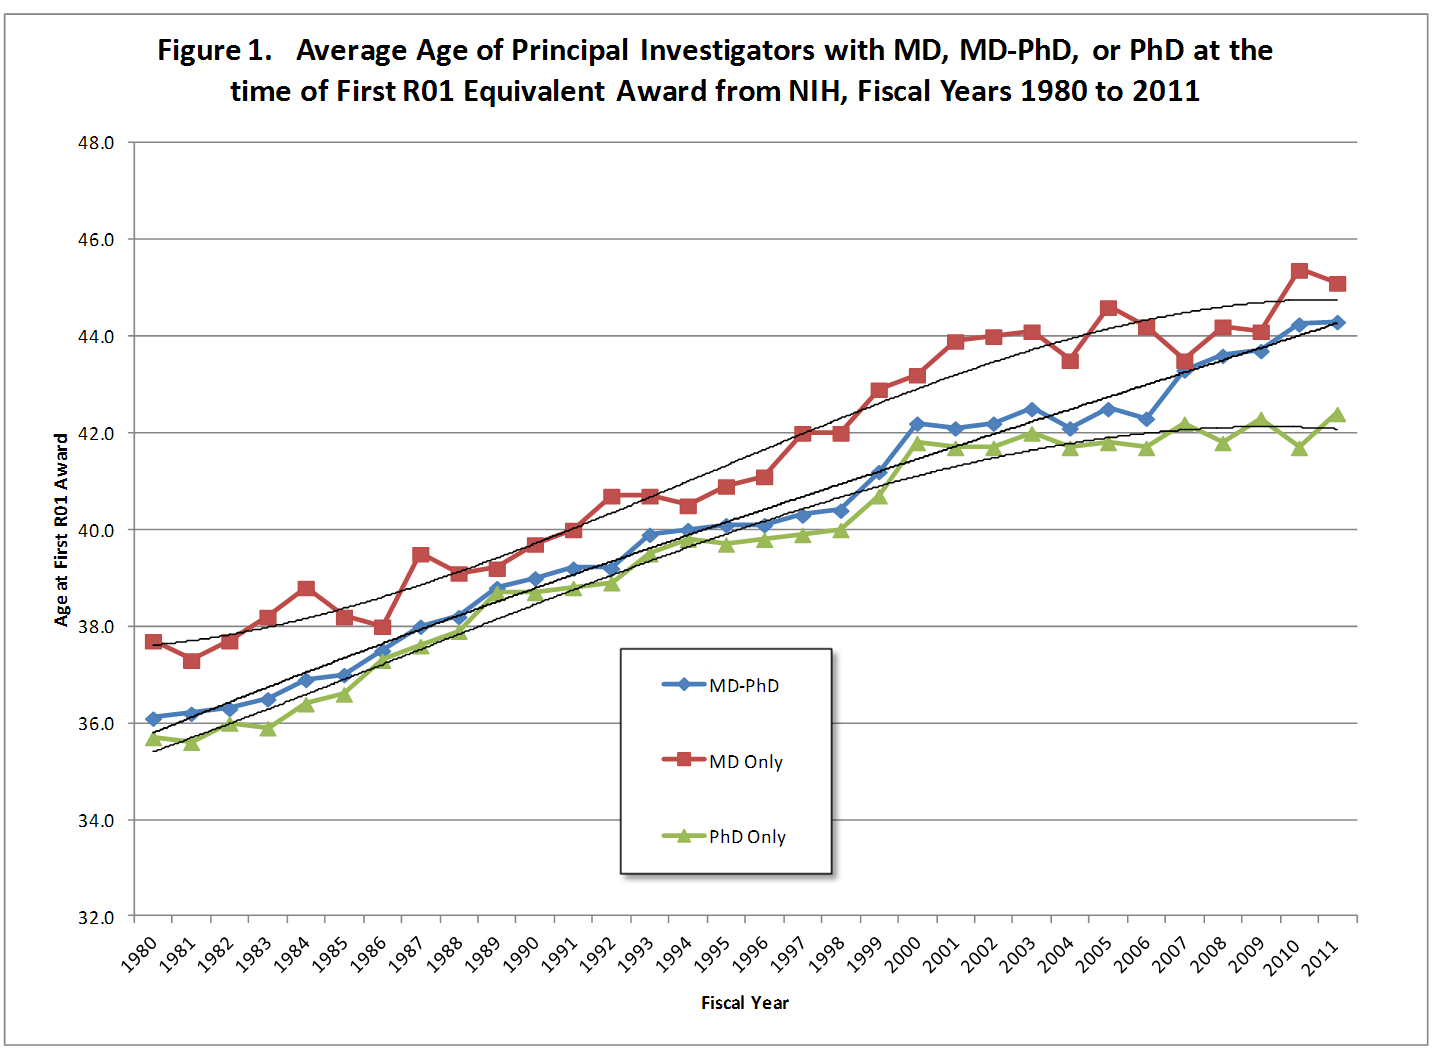 shows the average age of investigators at the time of first R01 steadily increasing from 1980 to 2011